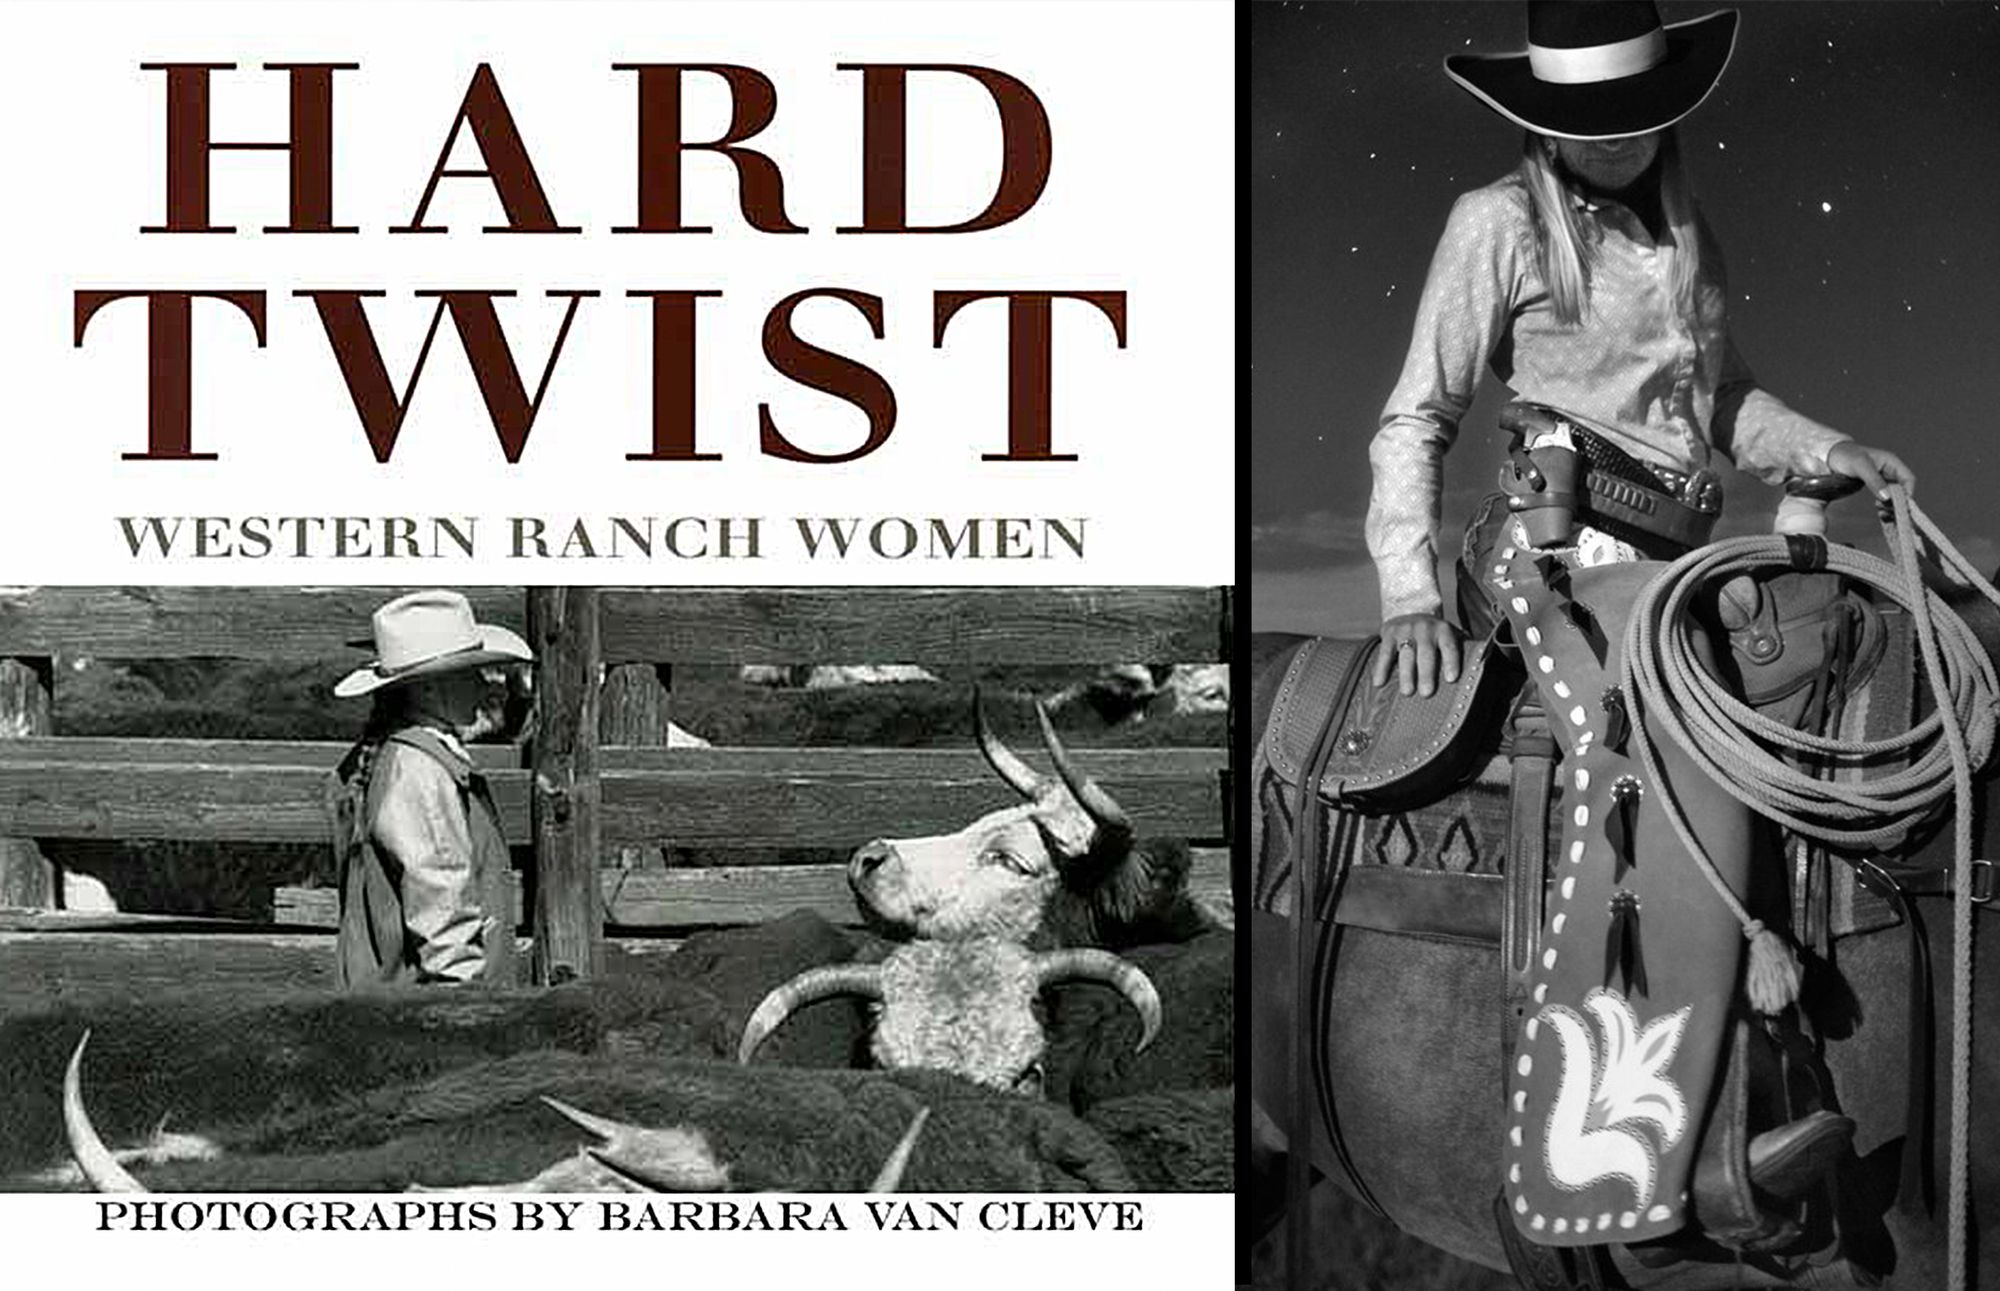 CFD Old West Museum Is Proud To Present The "Hard Twist: Western Ranch Women" Exhibit